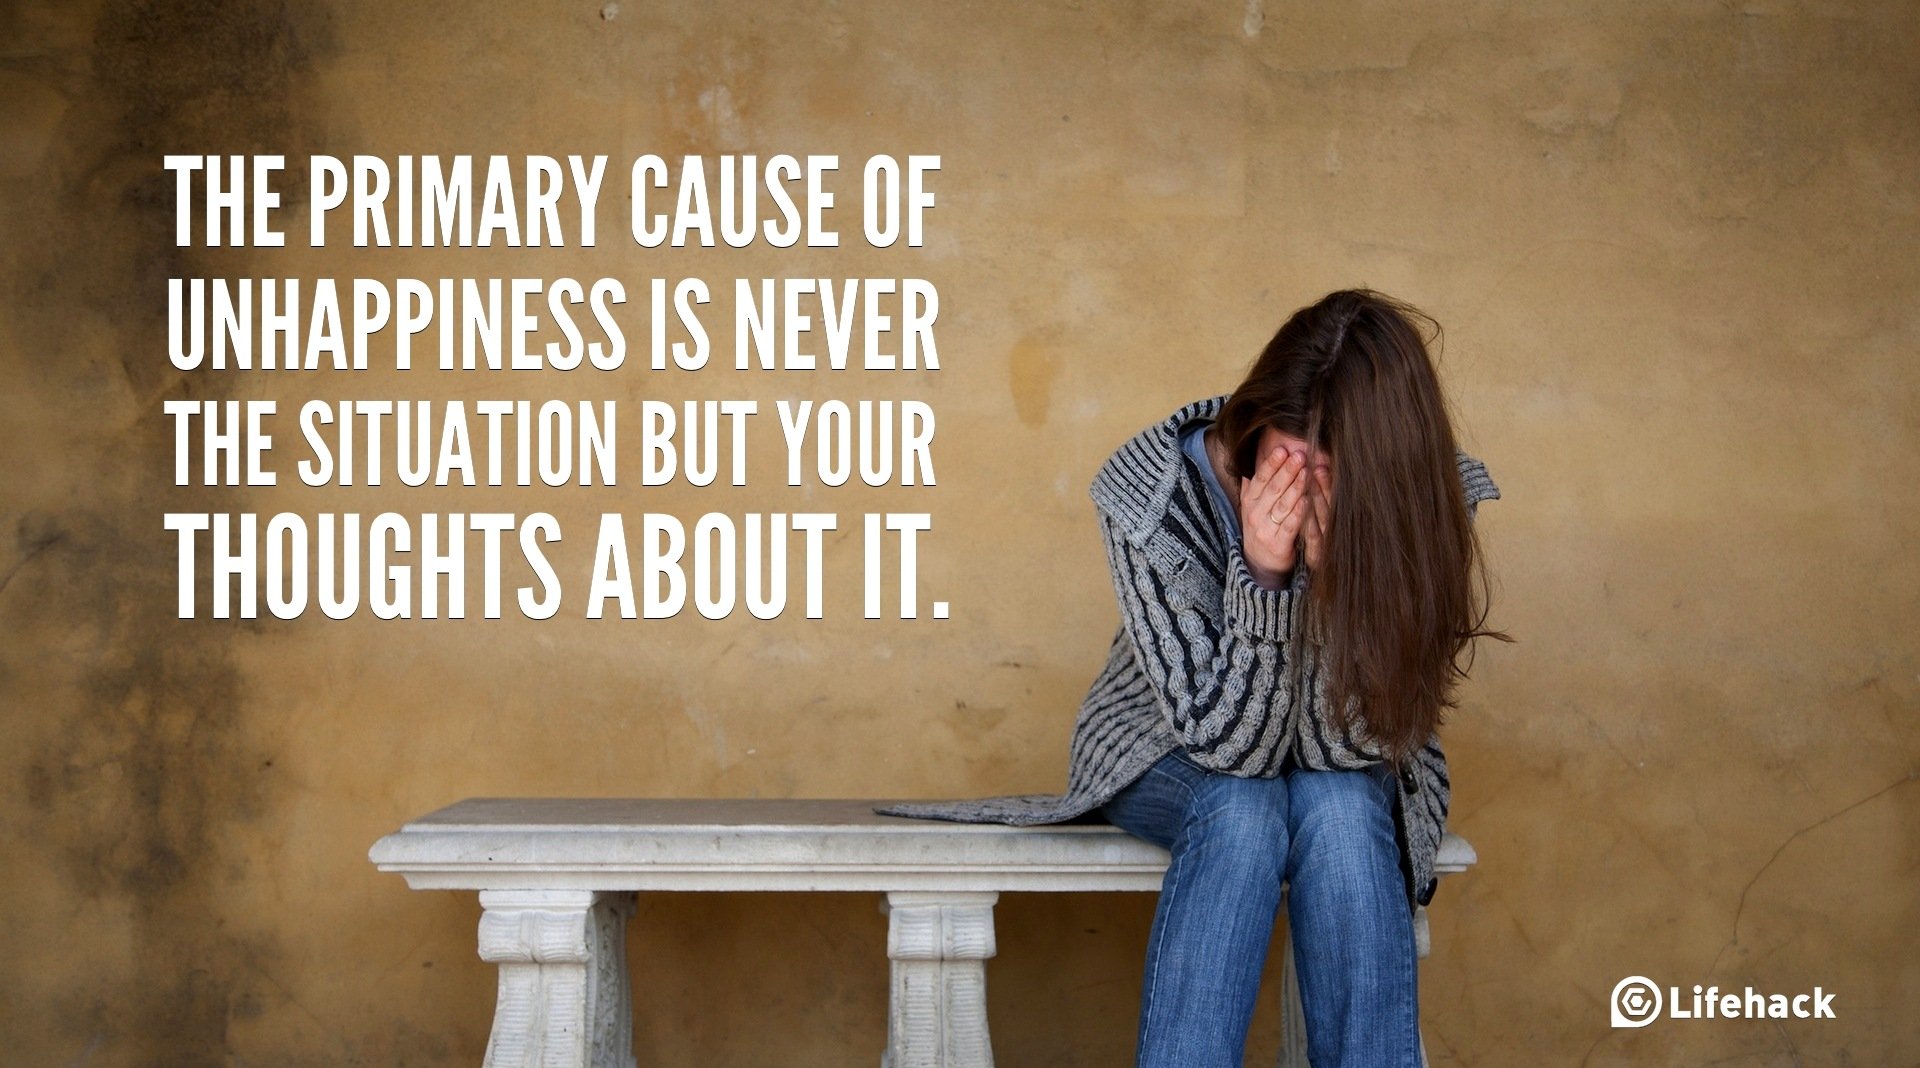 30sec Tip: The Primary Cause of unhappiness